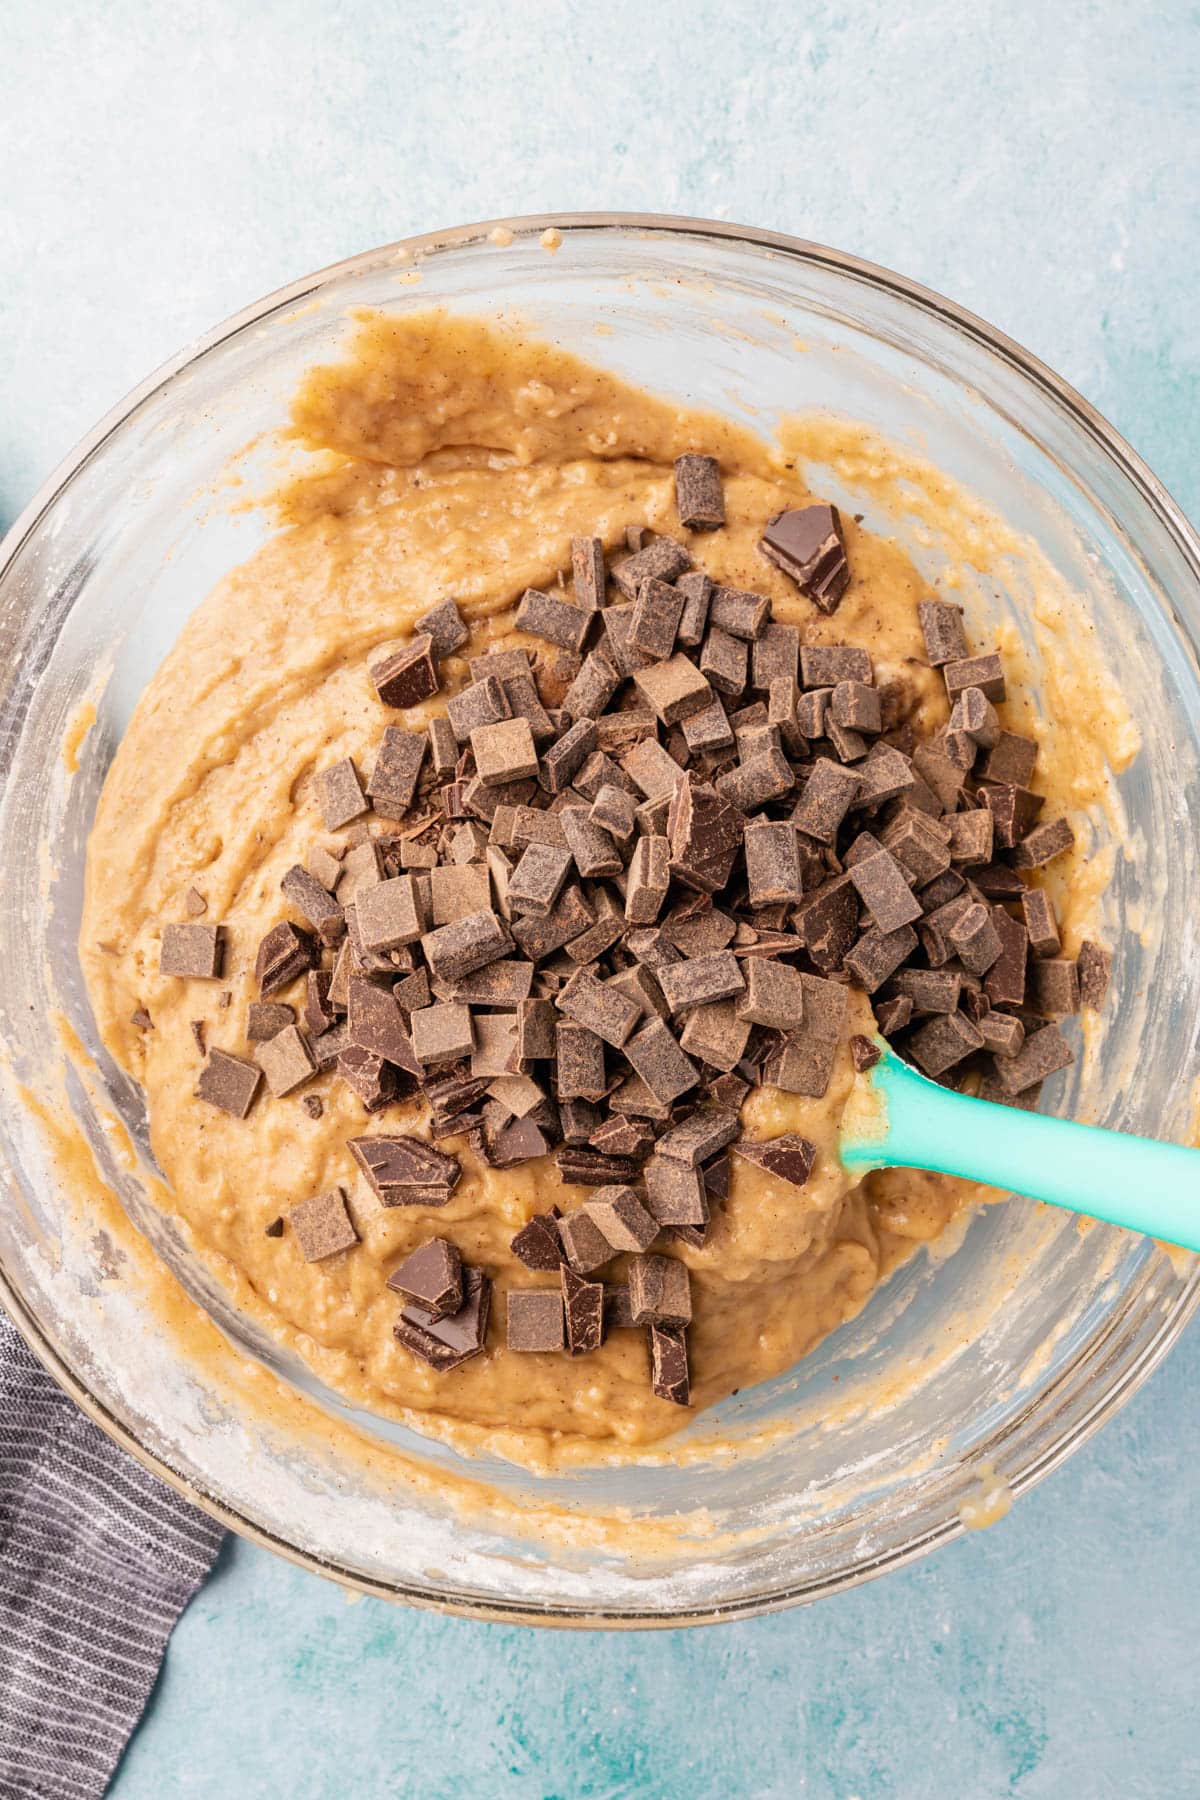 A glass mixing bowl filled with gluten-free banana bread batter that has been topped with chocolate chunks.